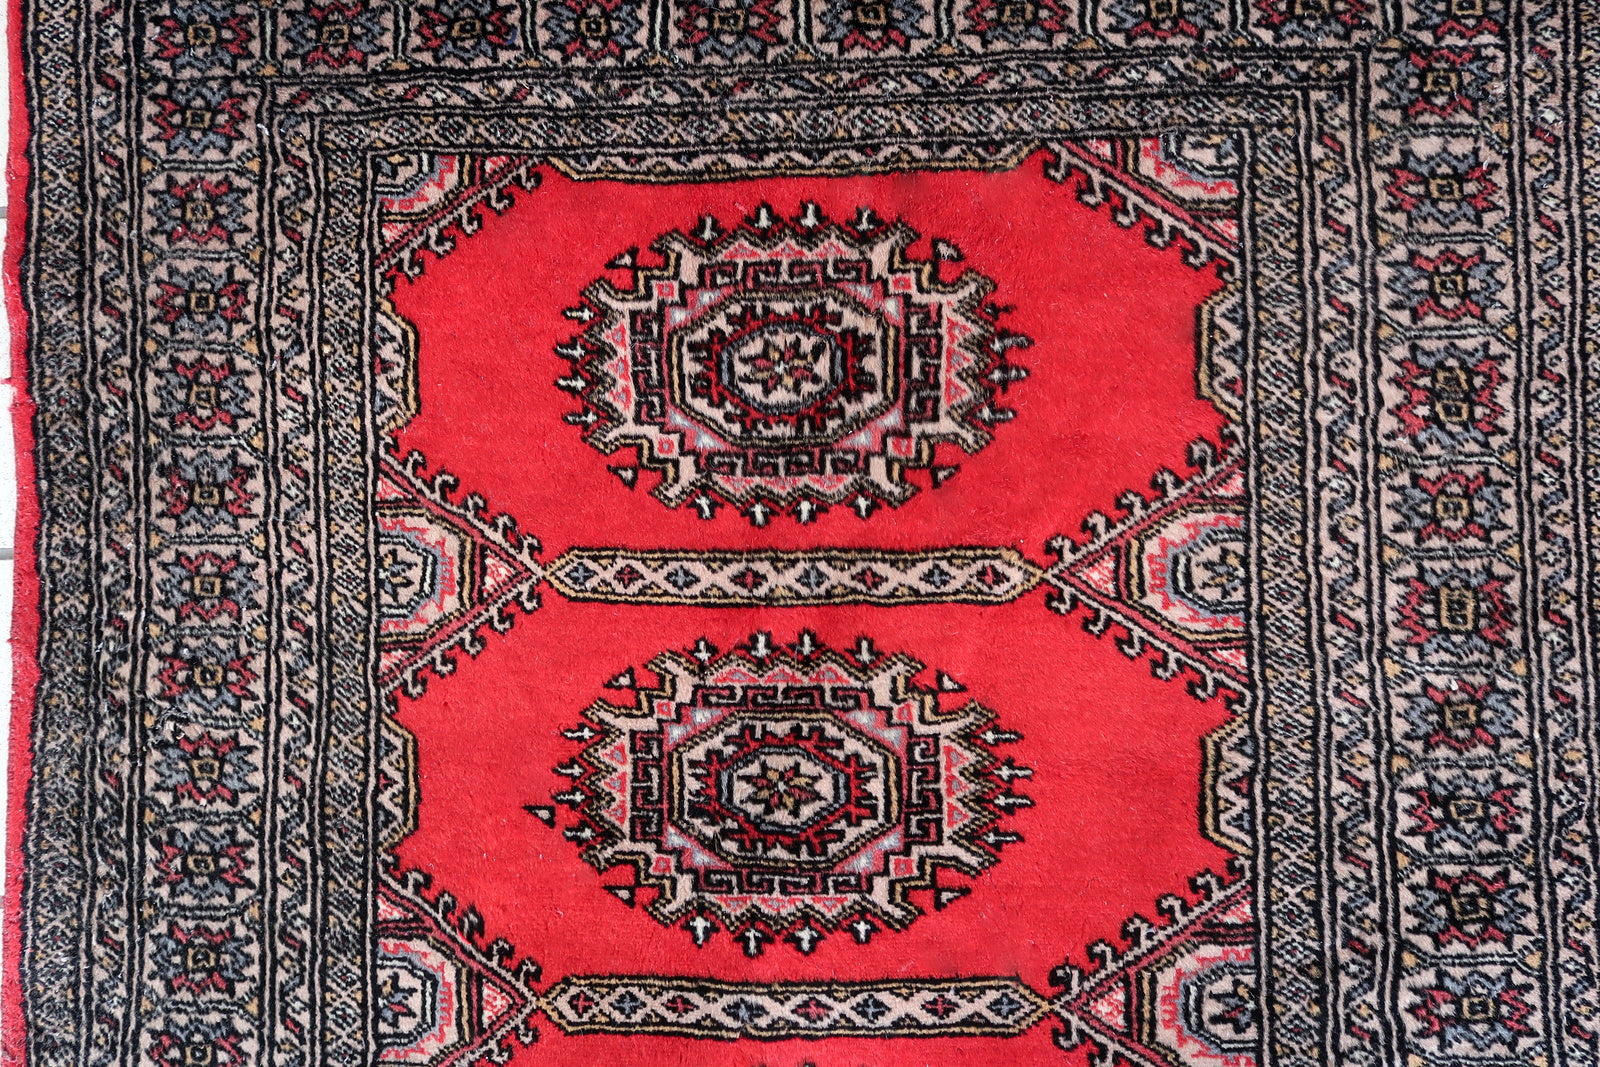 Intricate traditional design in beige and red.